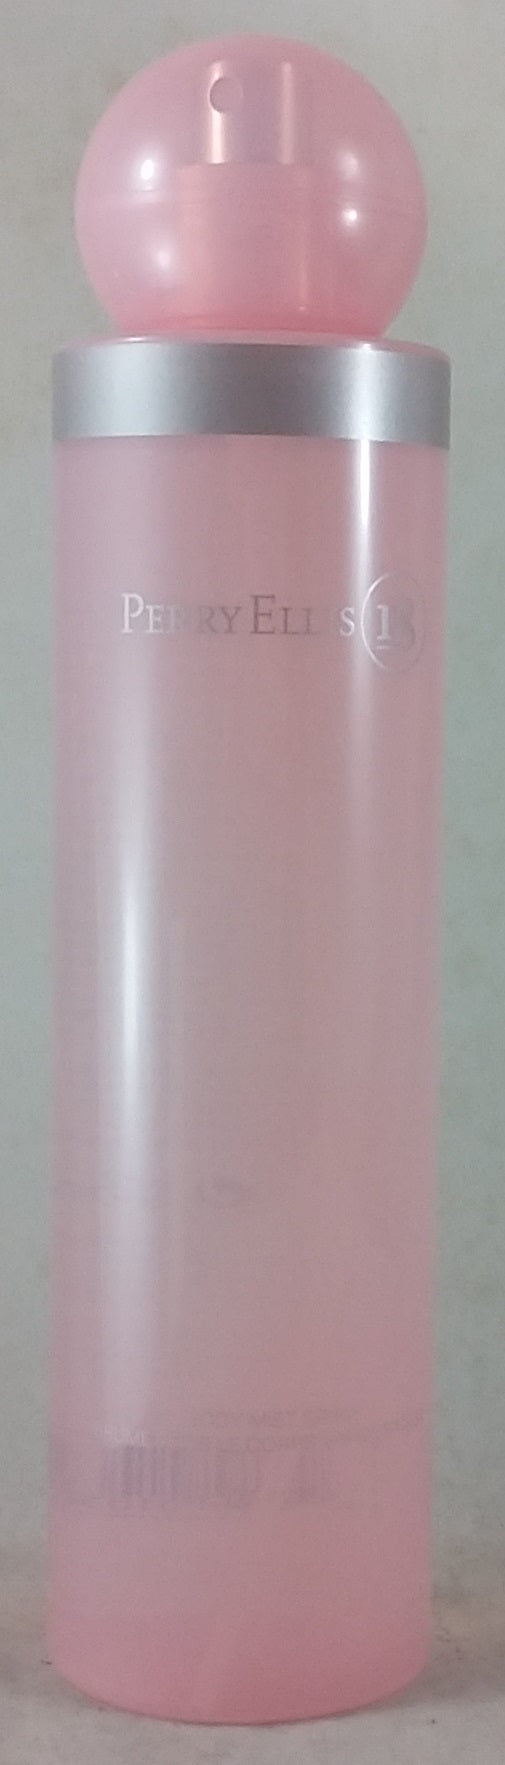 Perry Ellis Perry 18 for Women, 236ml Body Mist